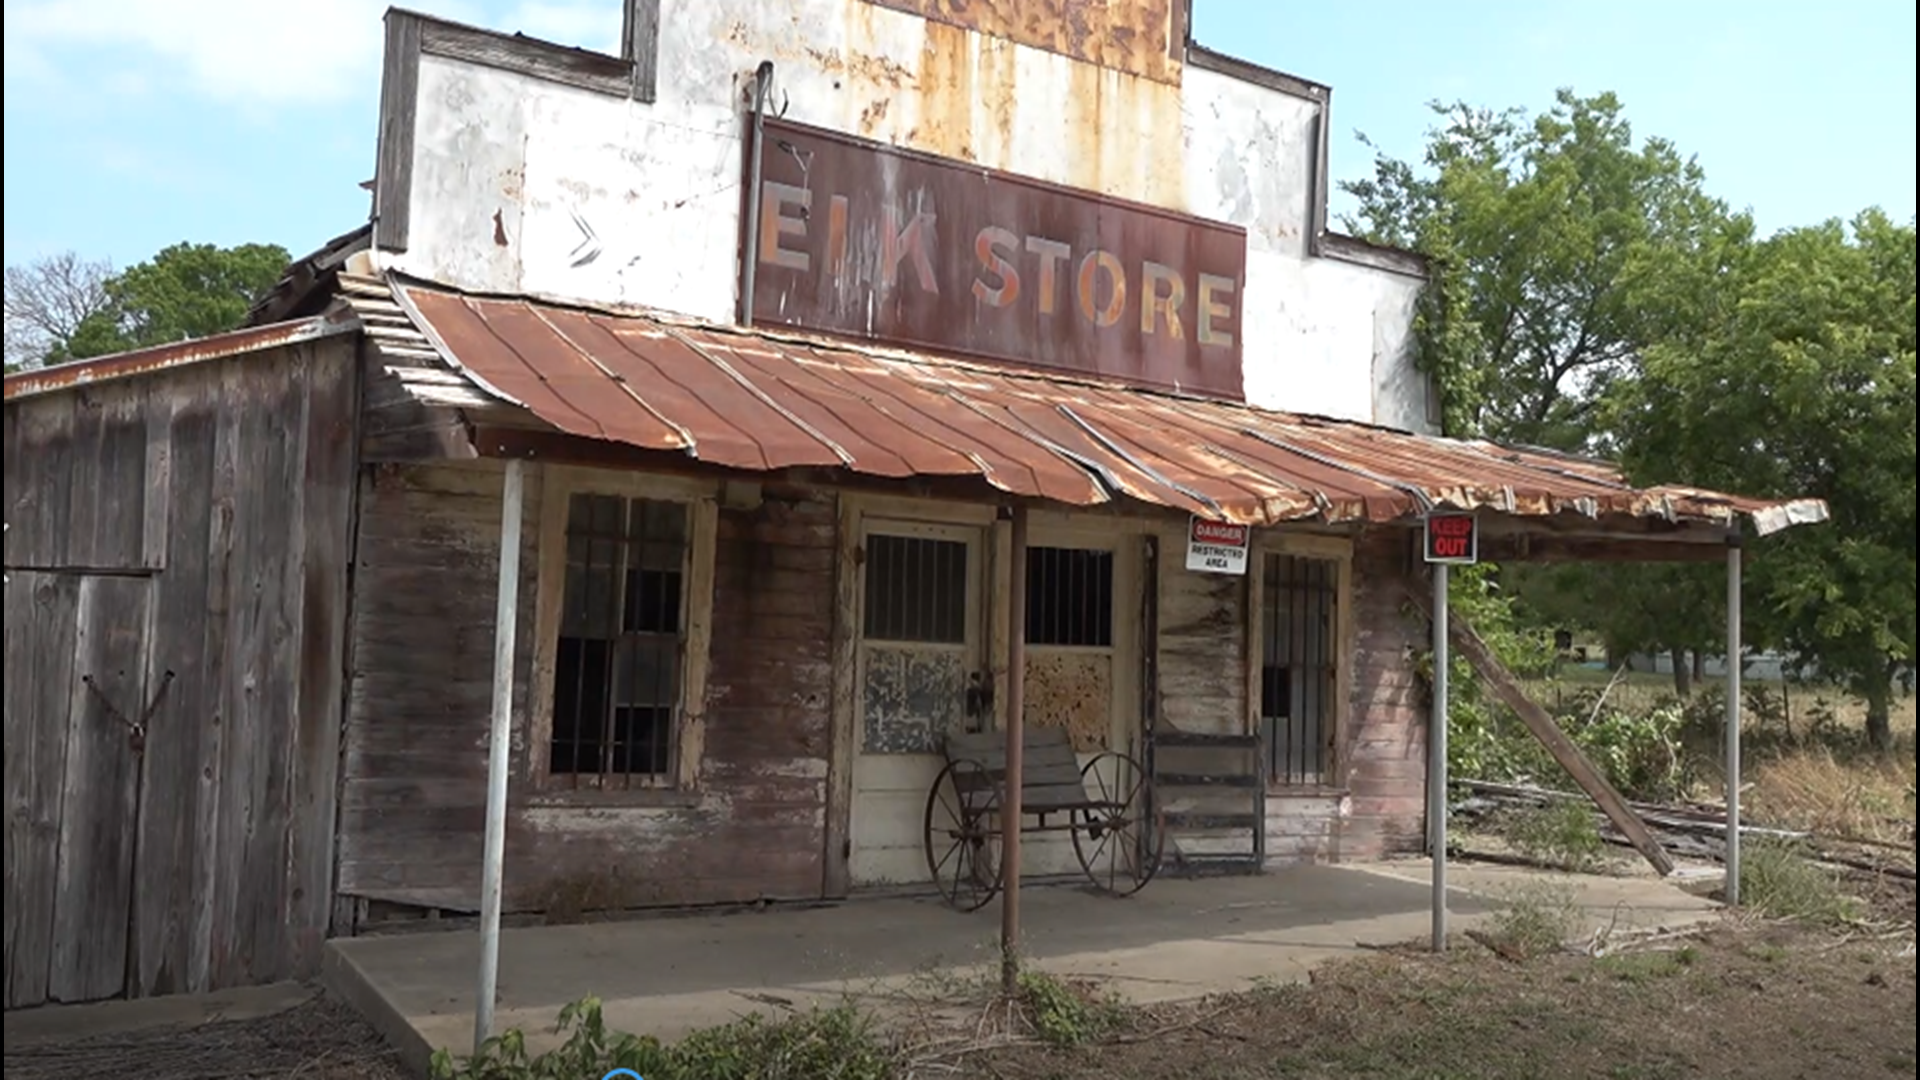 The store was once the heart and soul of the tiny town. It's still standing, but the store is in need of major repairs that owner Lance Haltom can't afford alone.